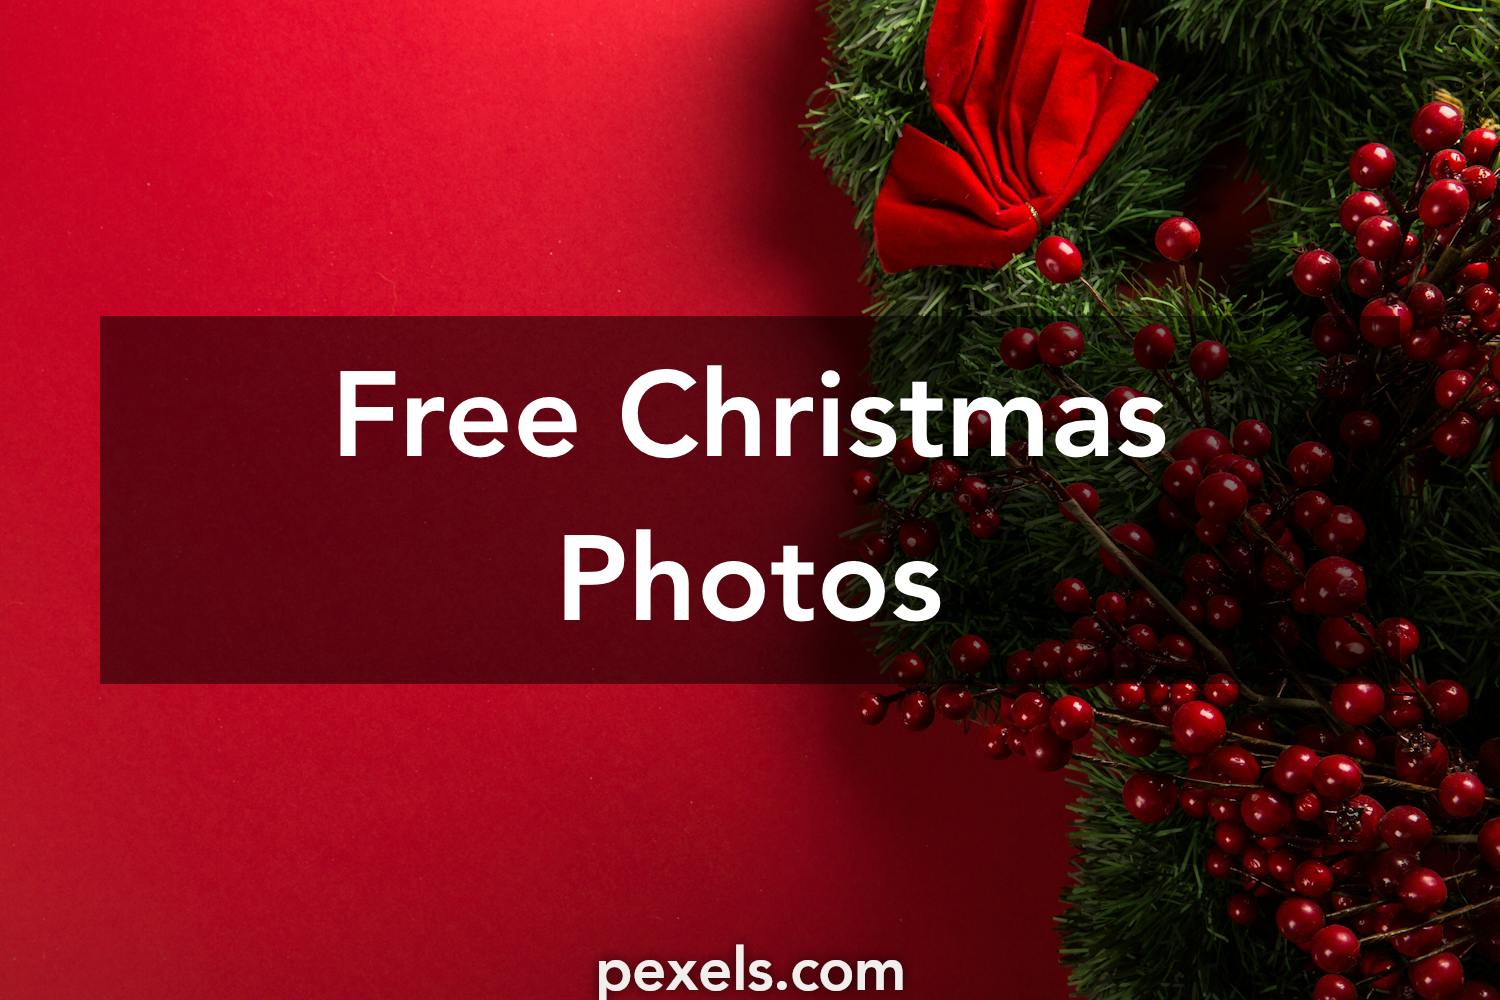 Christmas images · Pexels · Free Stock Photos